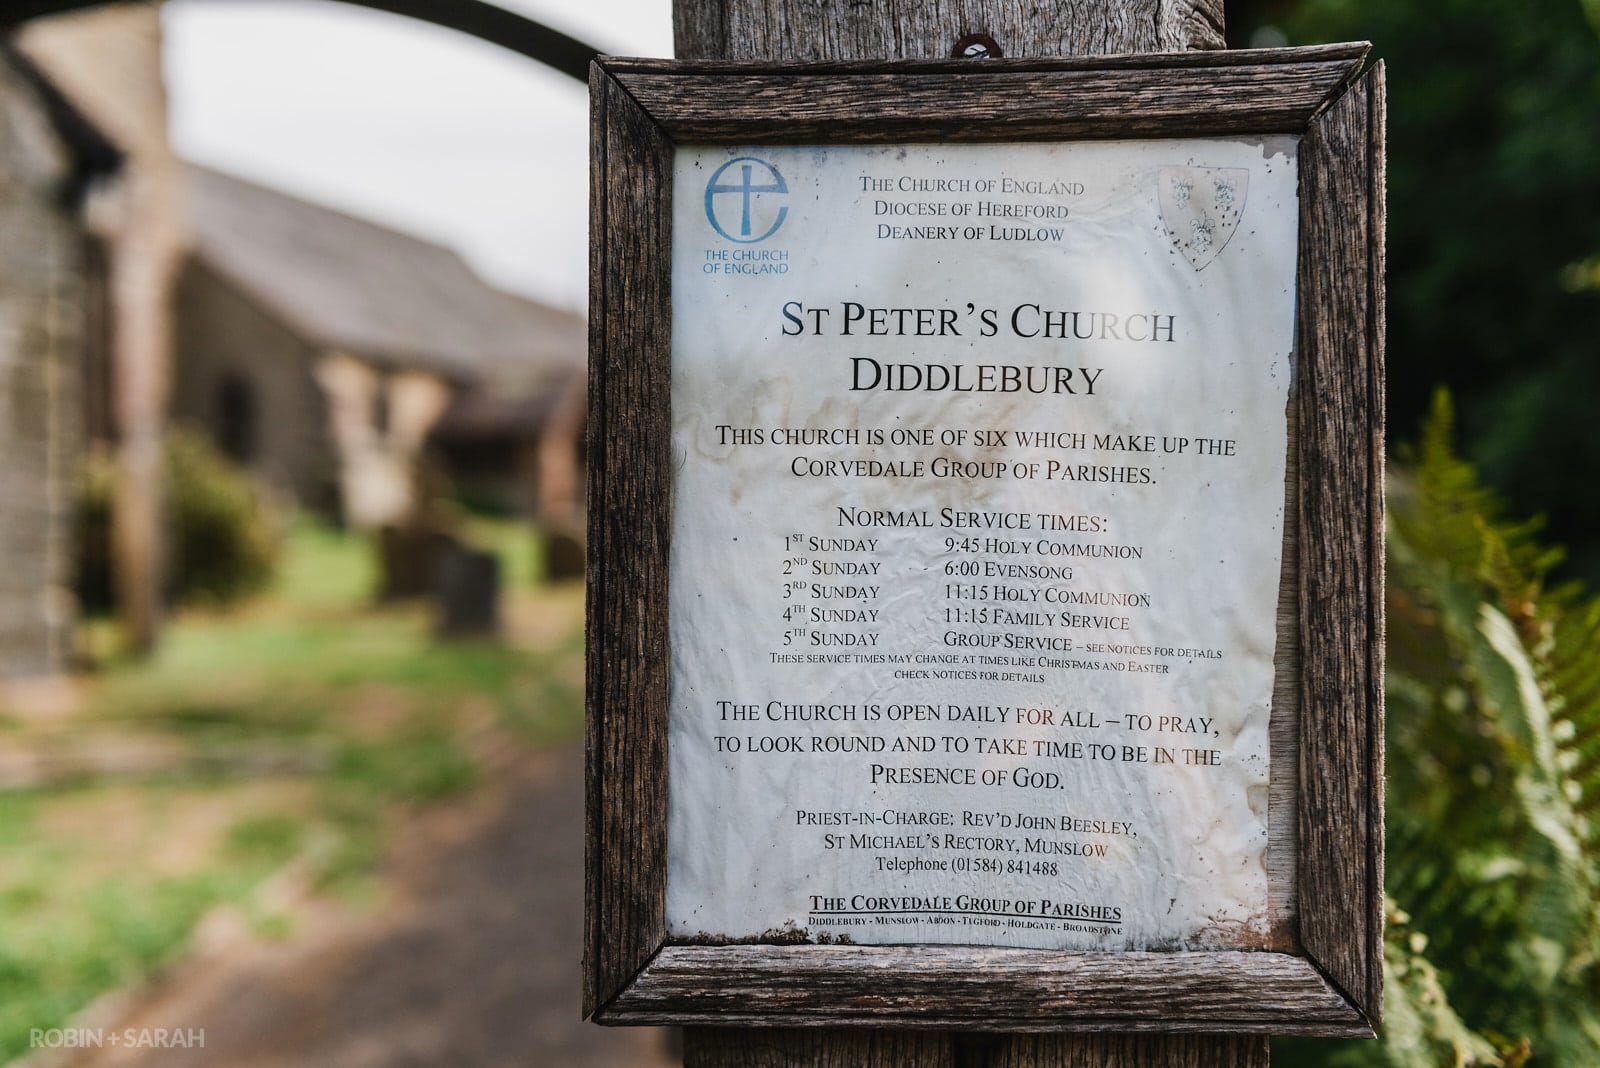 Sign for St Peter's Church Diddlebury